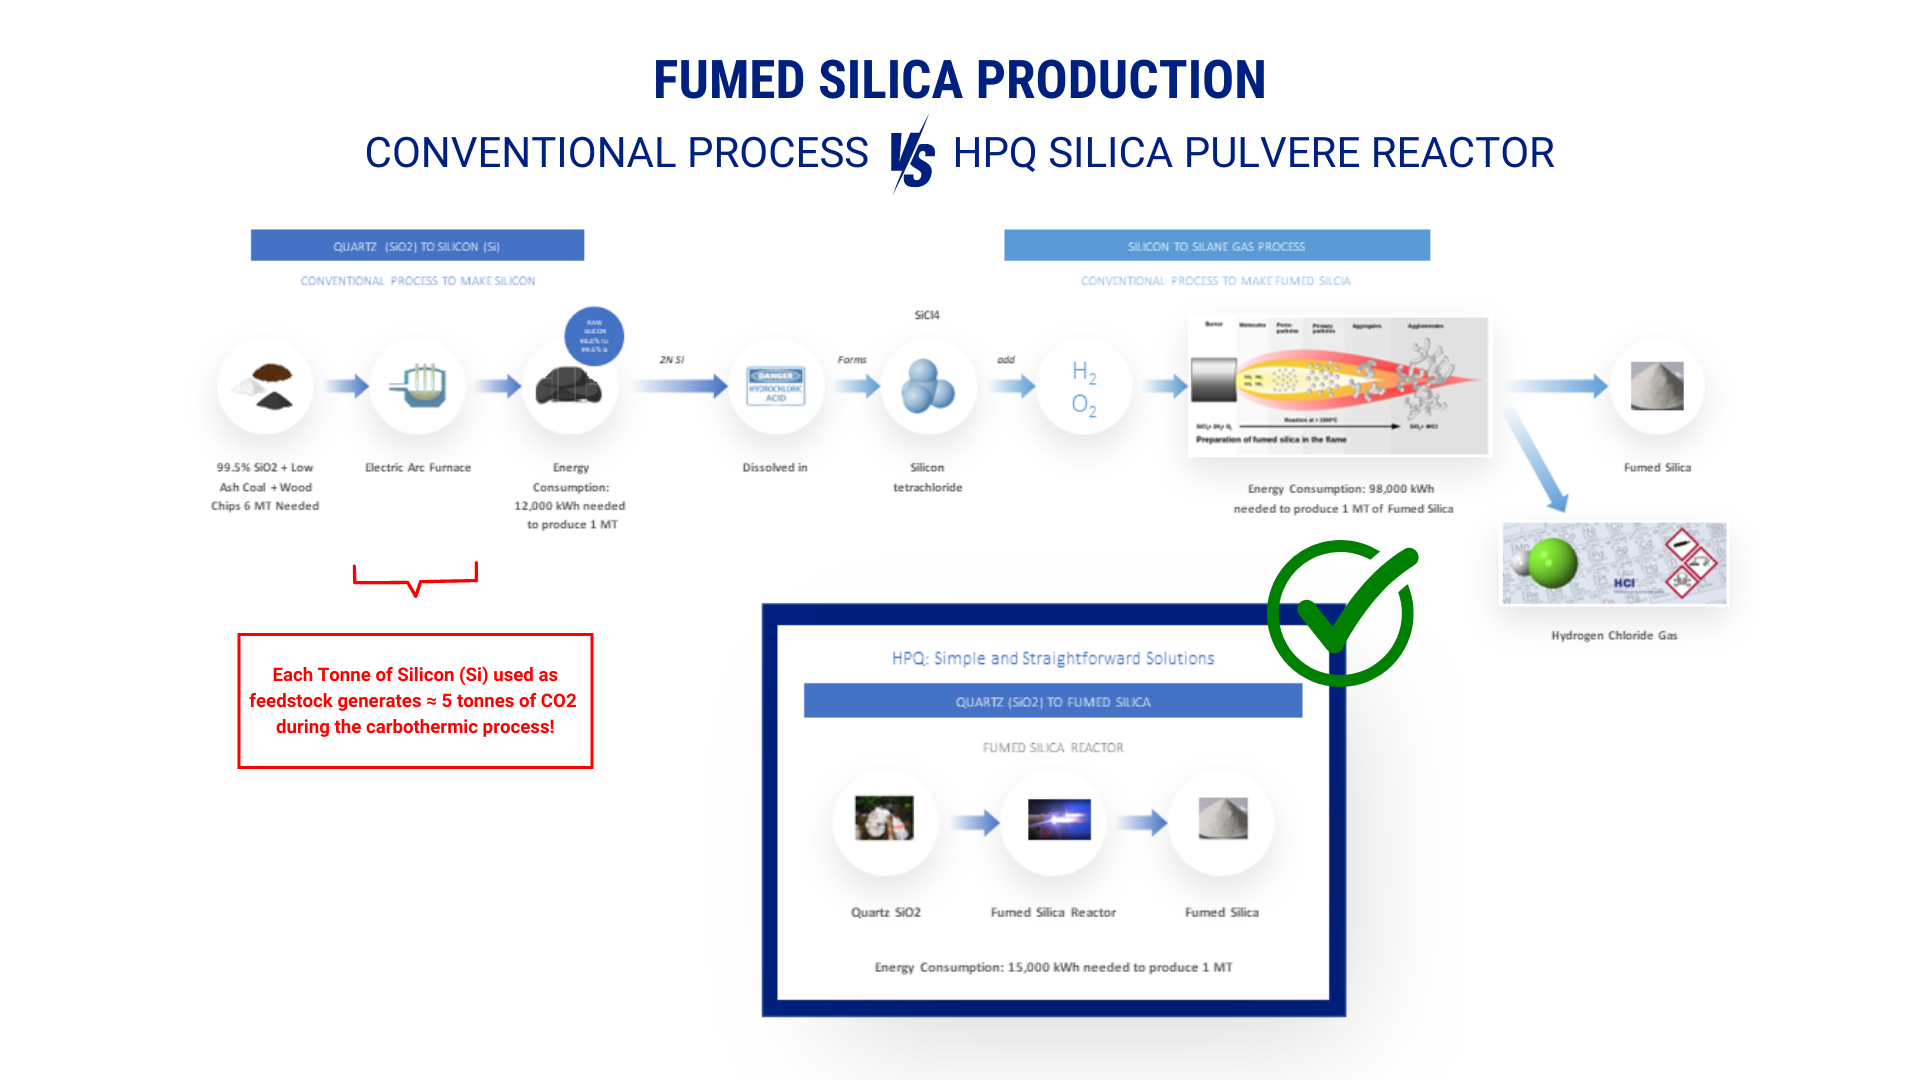 Fumed Silica Production - Conventional process vs HPQ POLVERE REACTOR